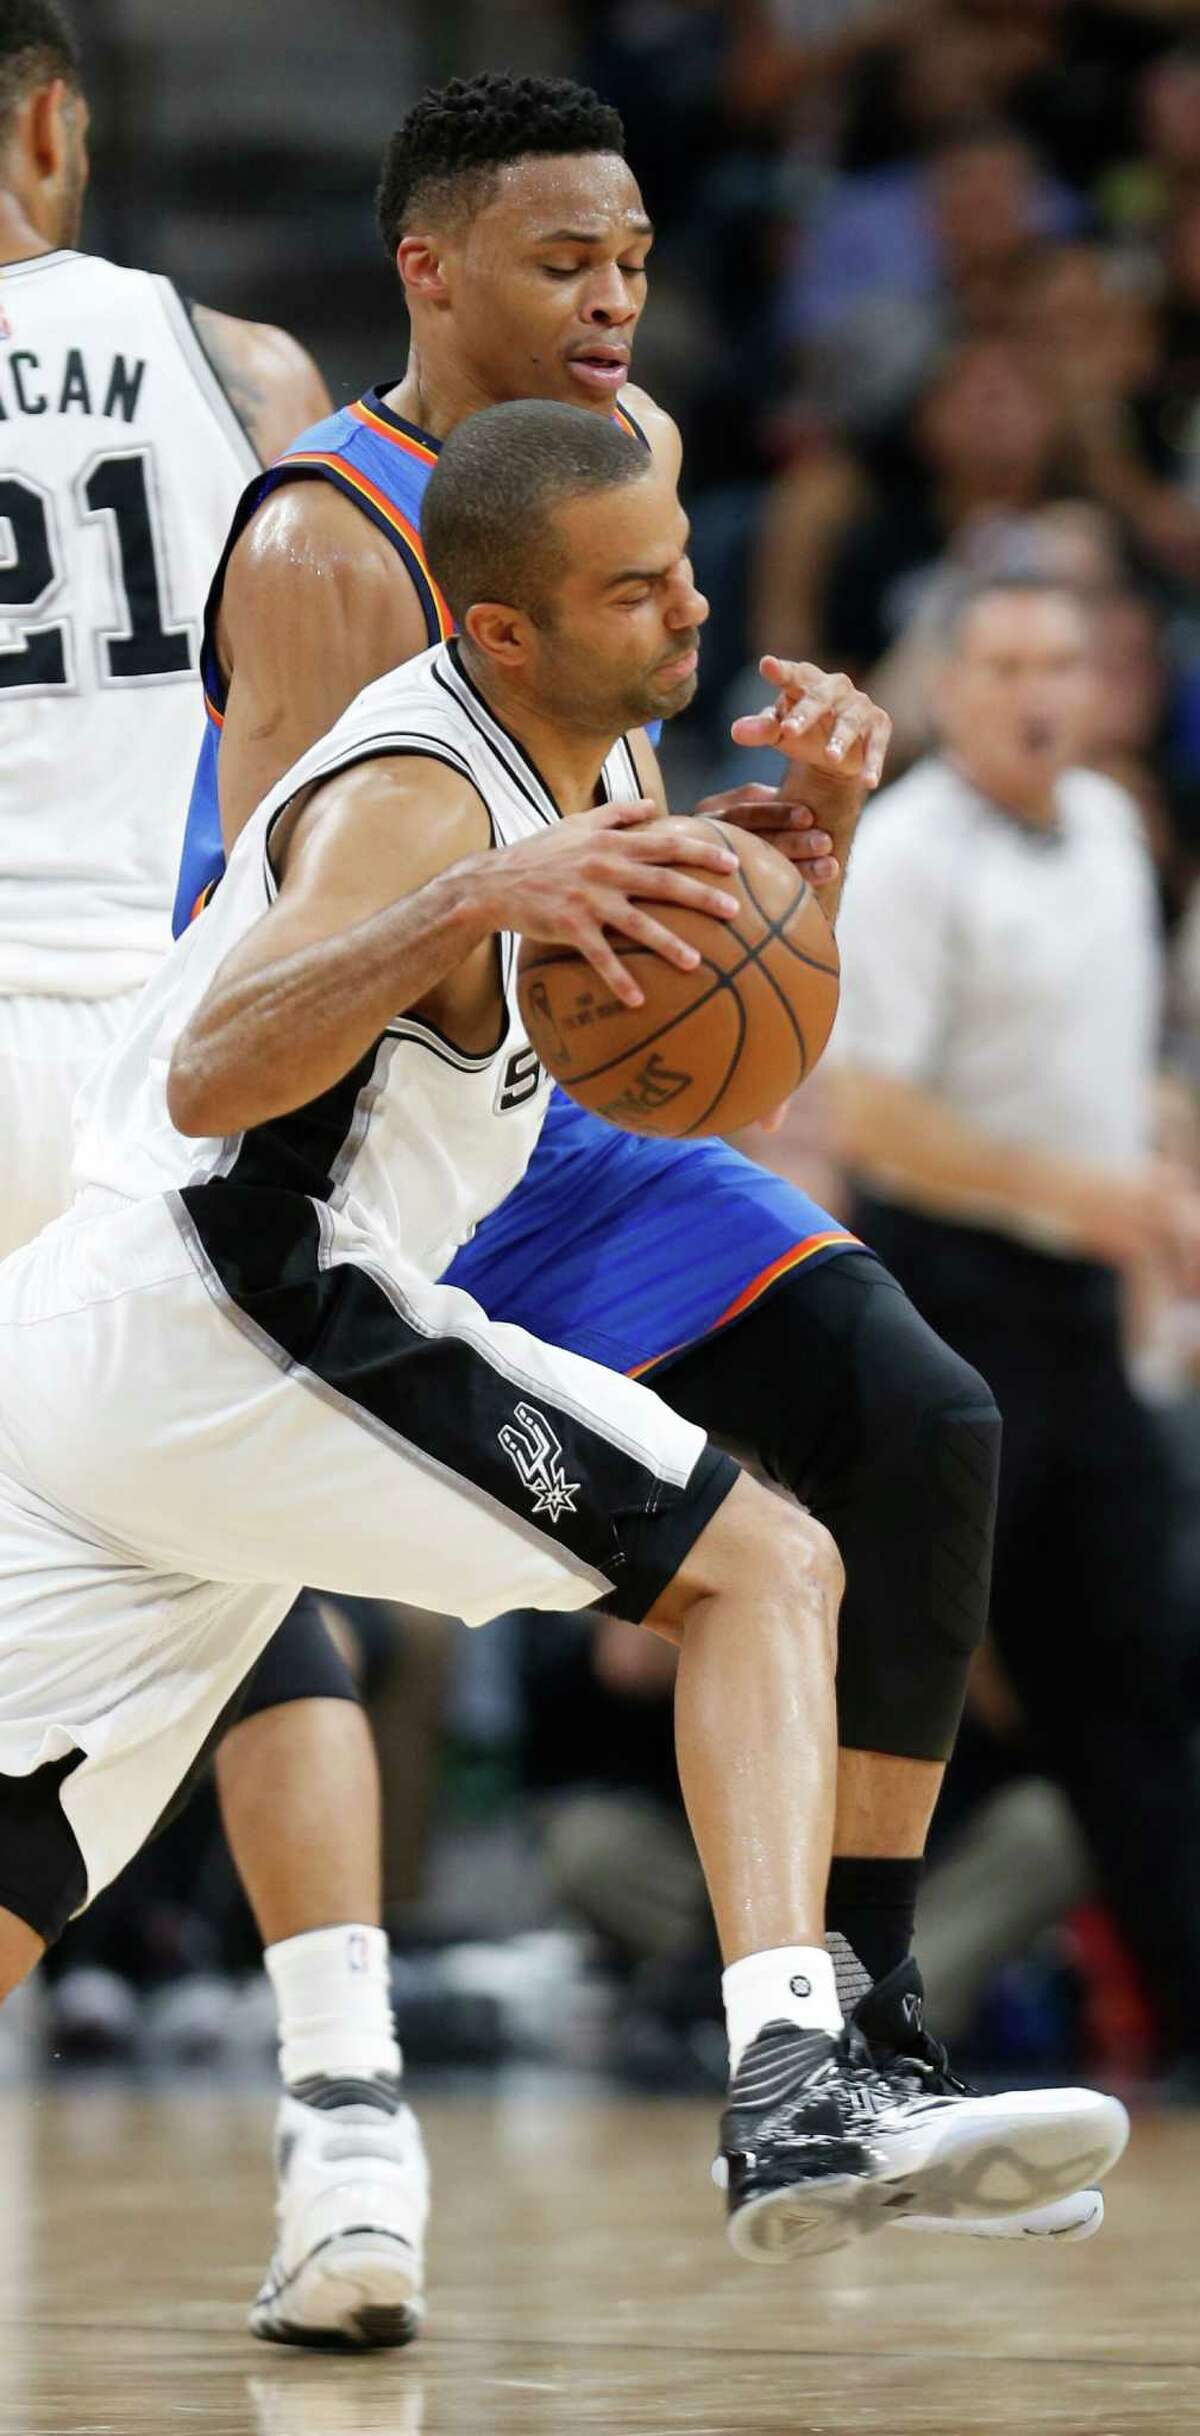 SAN ANTONIO,TX - MAY 10: Tony Parker #9 of the San Antonio Spurs is fouled by Russell Westbrook #0 of the Oklahoma City Thunder in game Five of the Western Conference Semifinals during the 2016 NBA Playoffs at AT&T Center on May 10, 2016 in San Antonio, Texas. NOTE TO USER: User expressly acknowledges and agrees that , by downloading and or using this photograph, User is consenting to the terms and conditions of the Getty Images License Agreement.